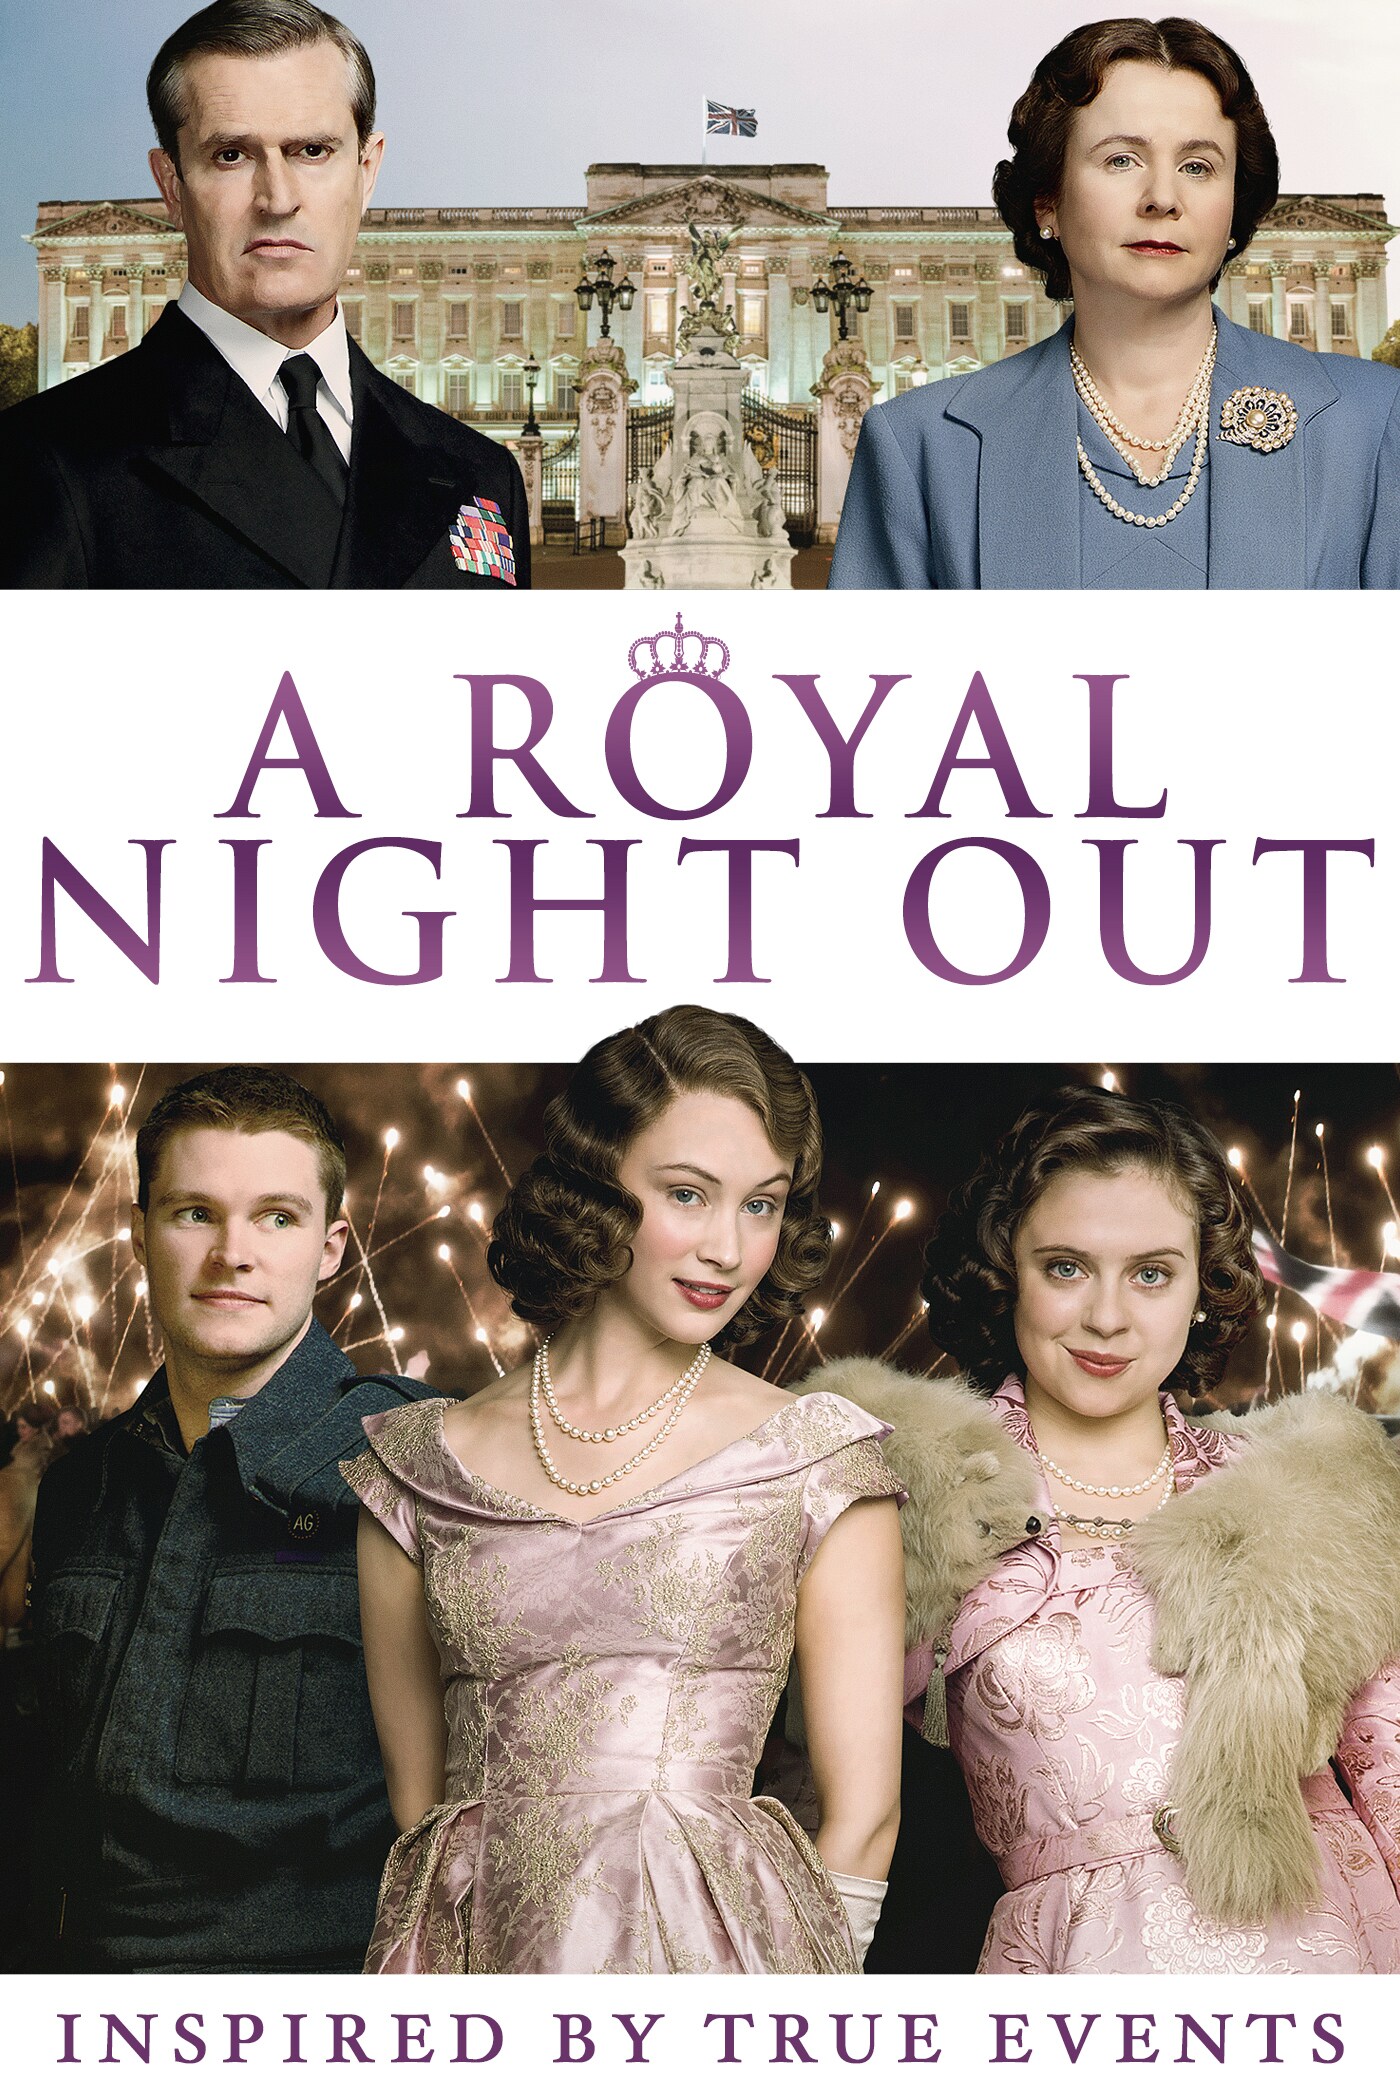 A Royal Night Out movie poster (Inspired by True Events)